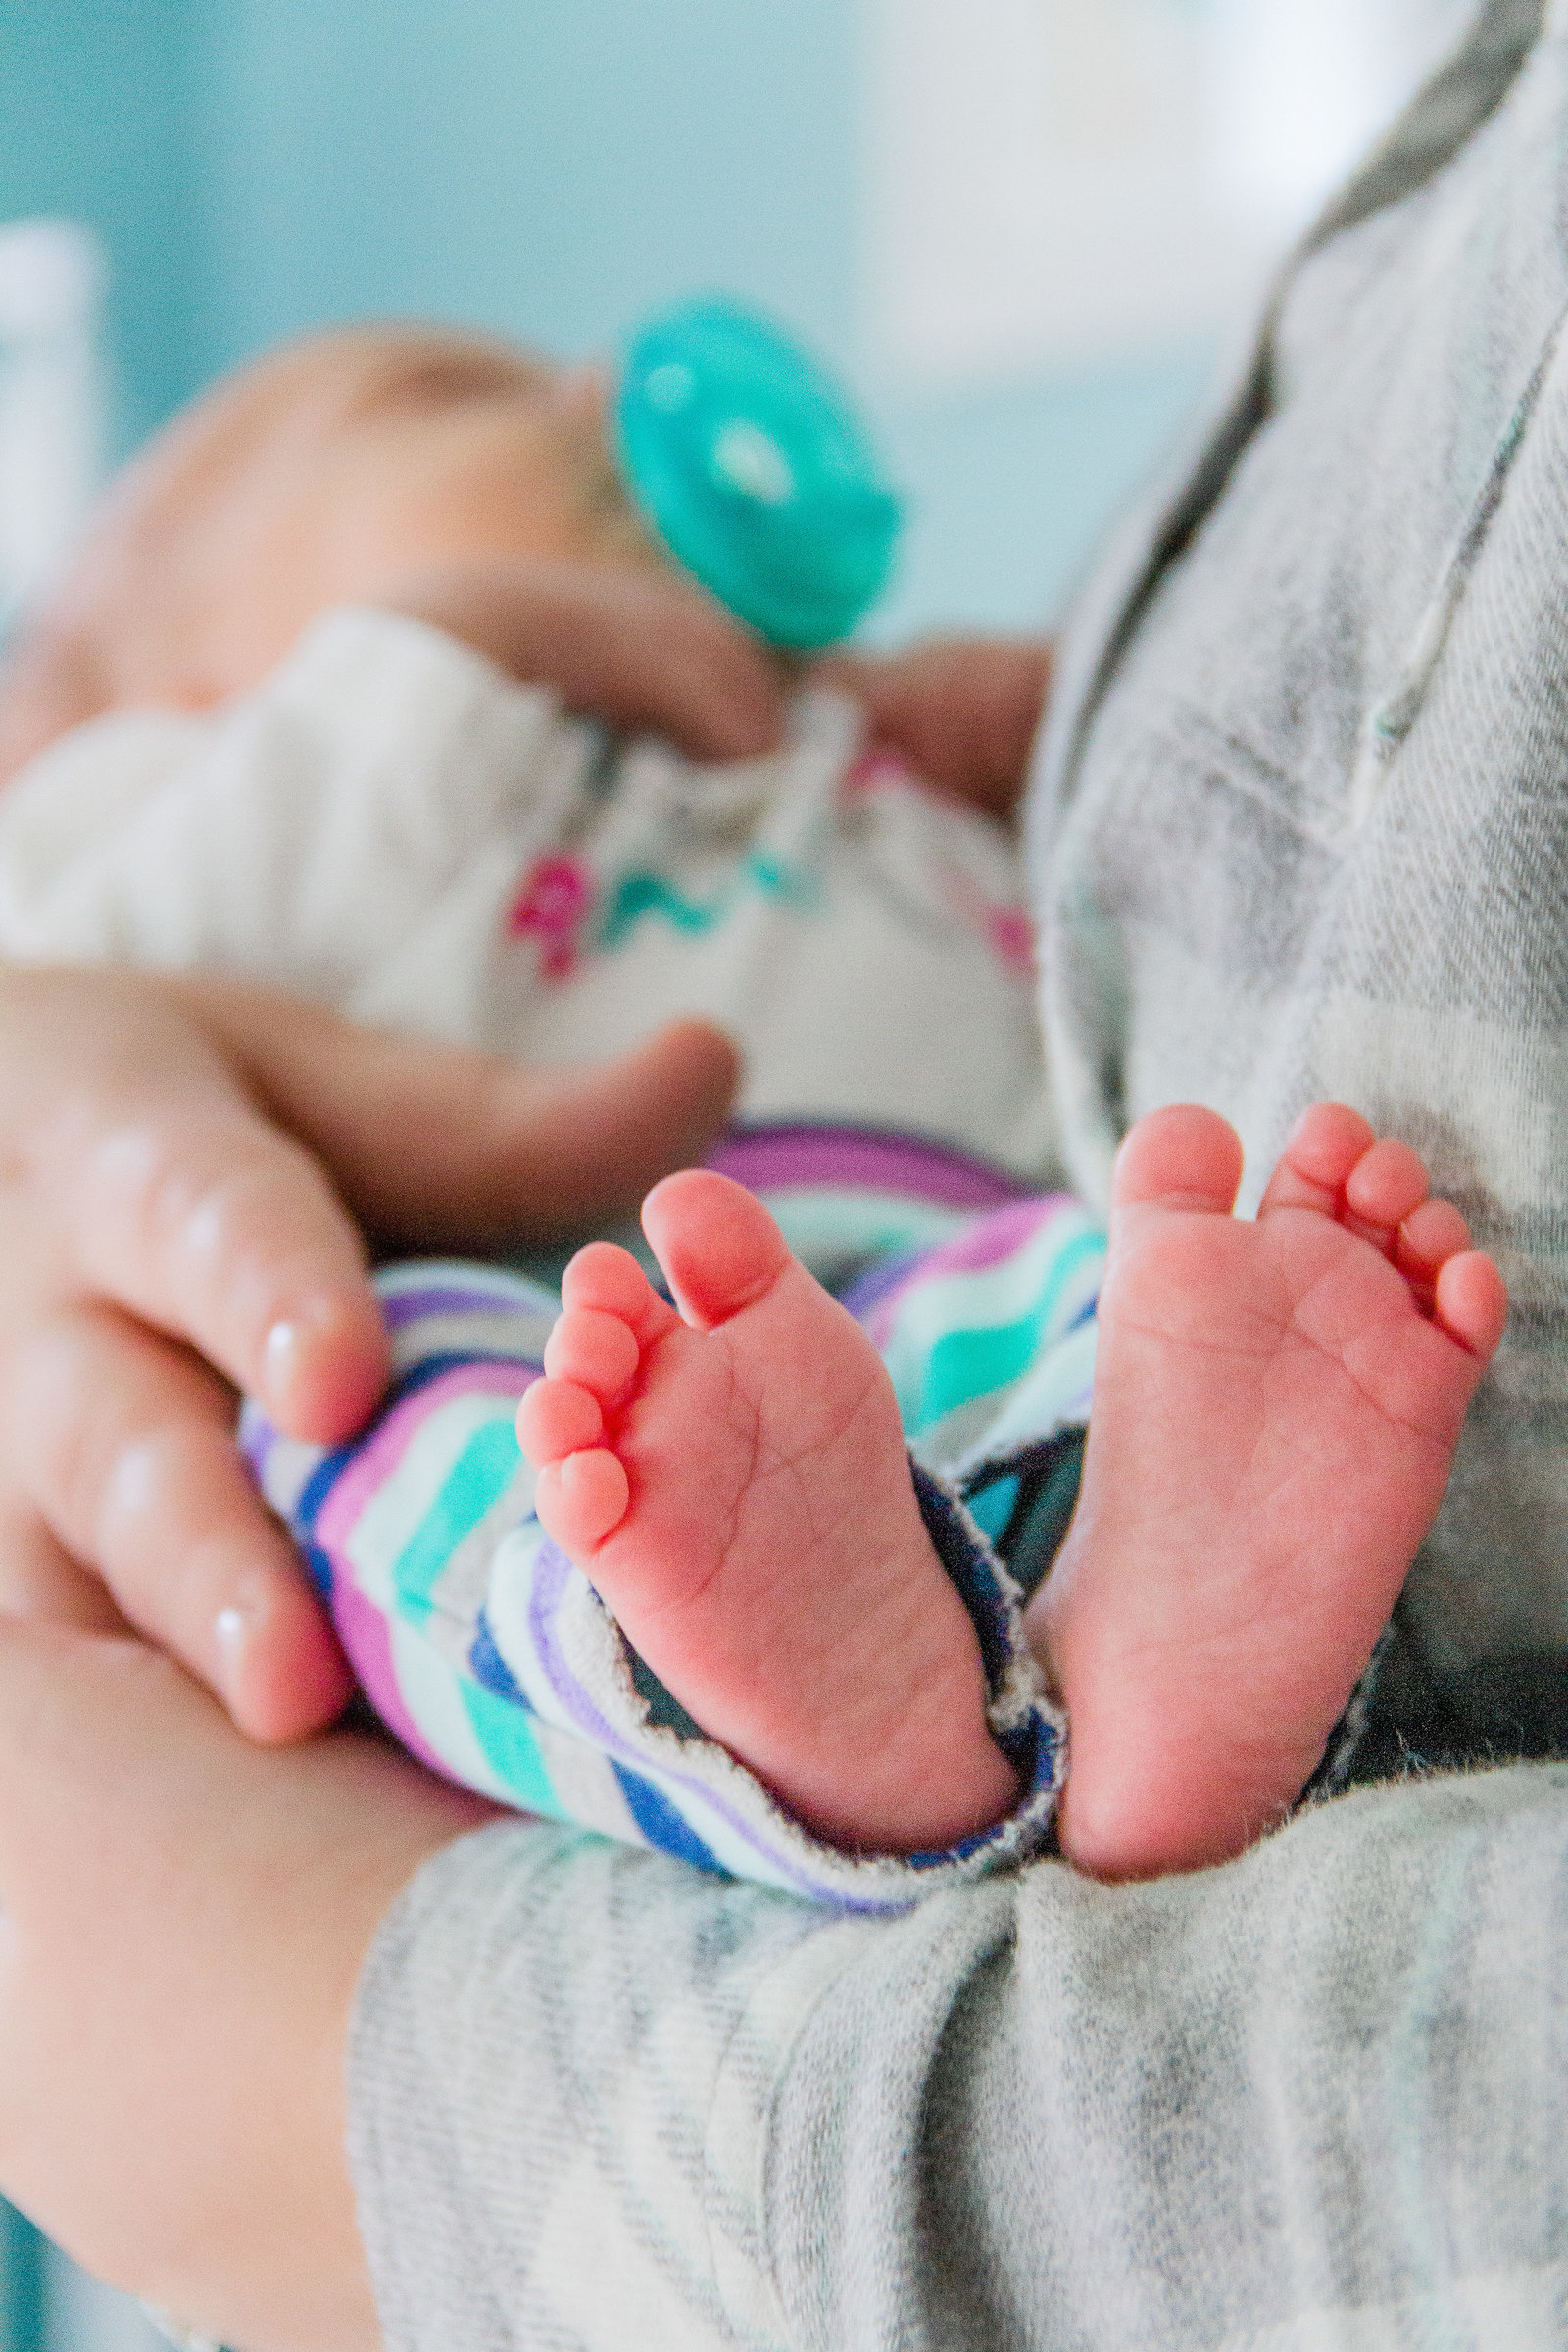 Newborn baby toes face the camera while the infant is held in her moms arms